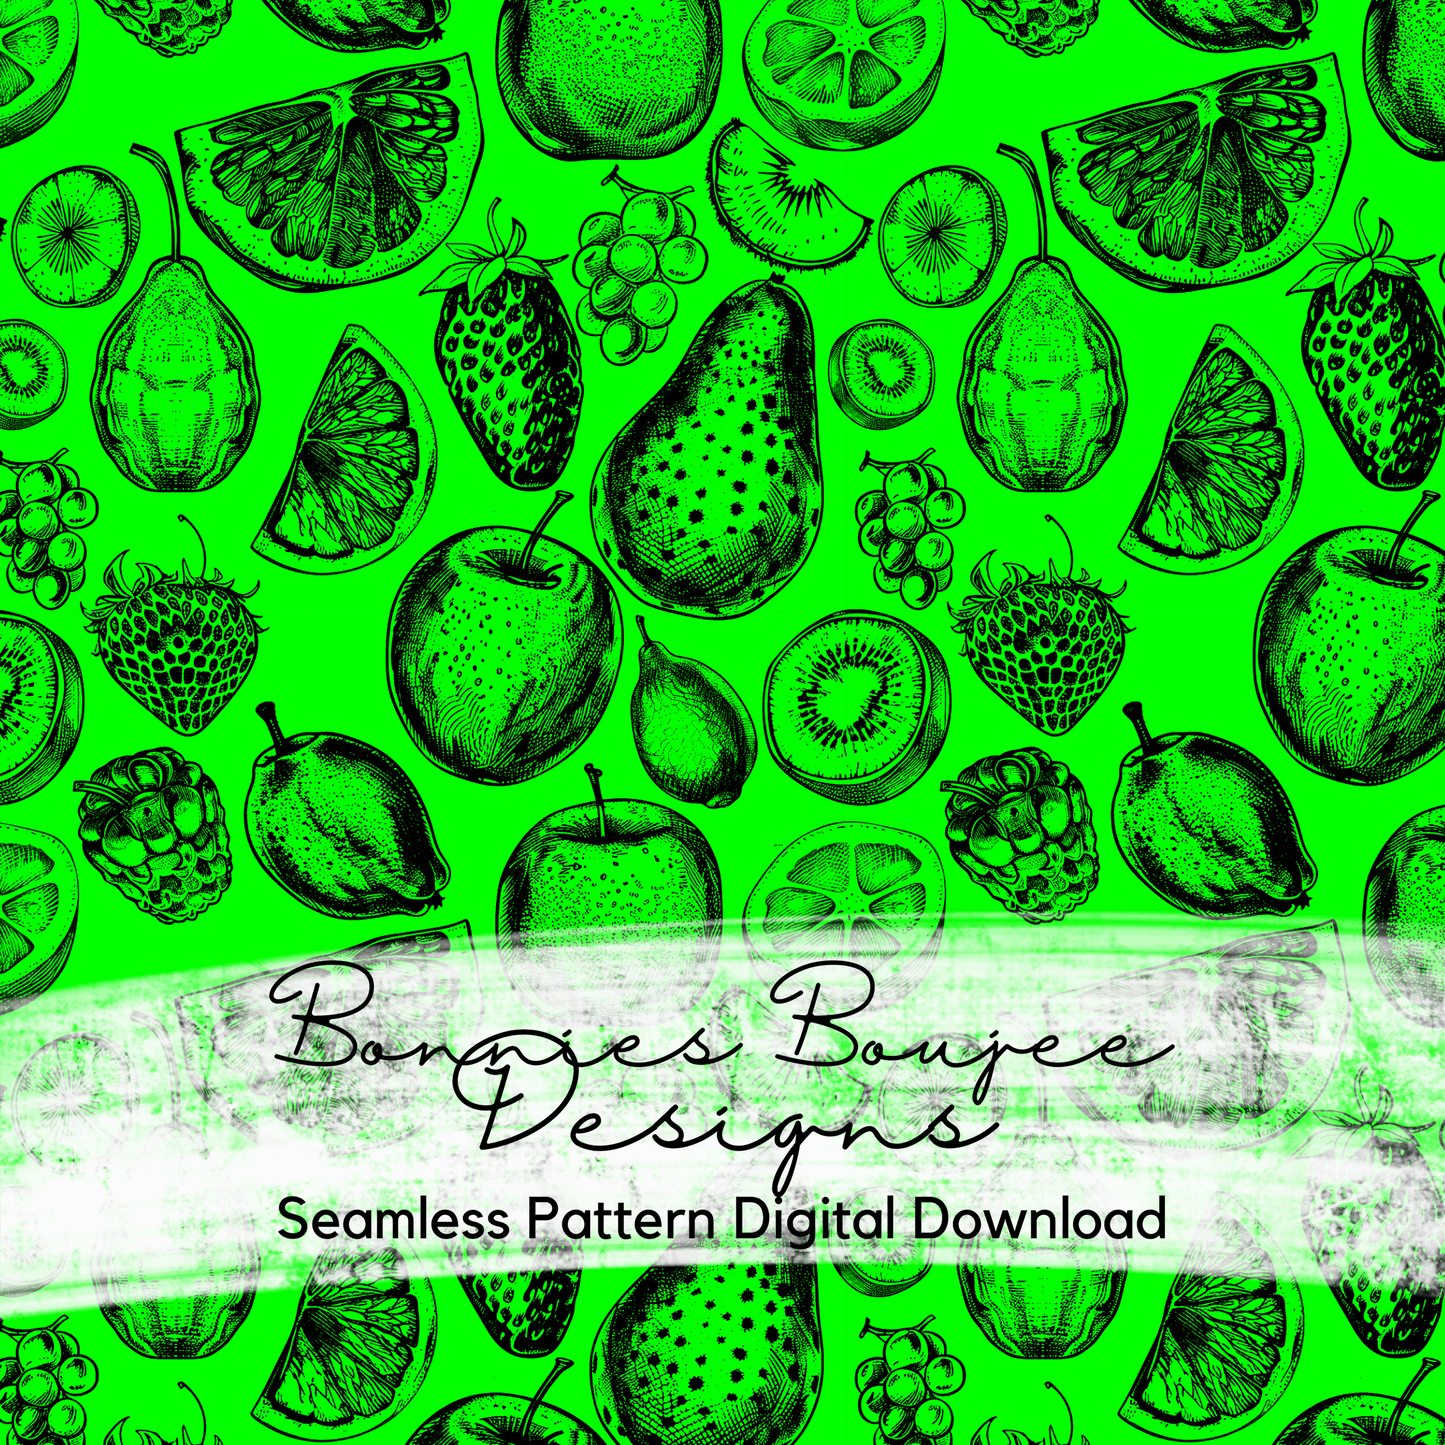 Sketched Fruits on Solid Colored Background Bundle Seamless files including SWIM SAFE colors